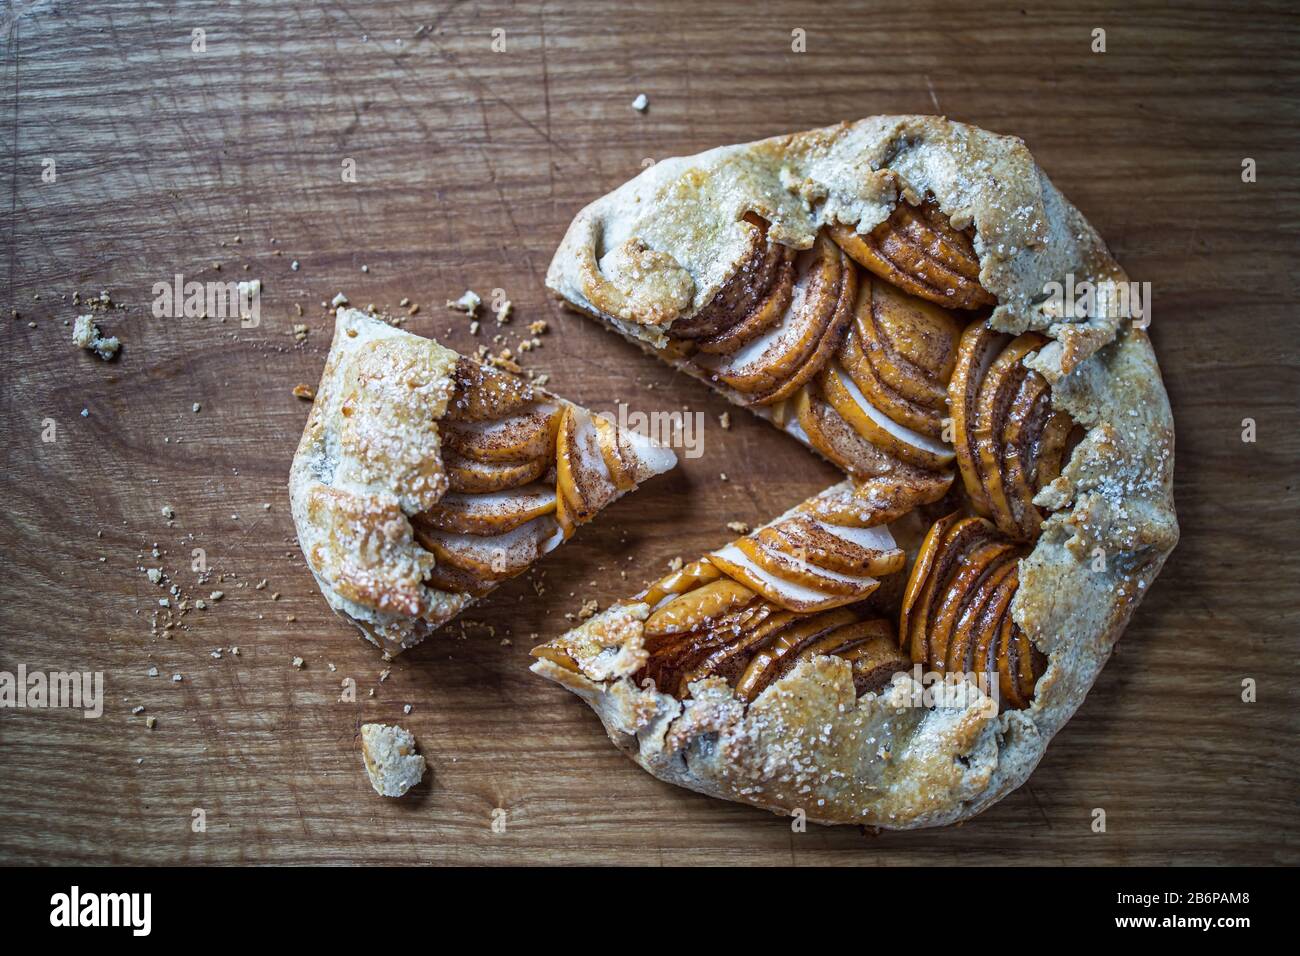 Apple galette - pie sliced into pieces on a wooden dark background. Copy space, flat lay. Stock Photo